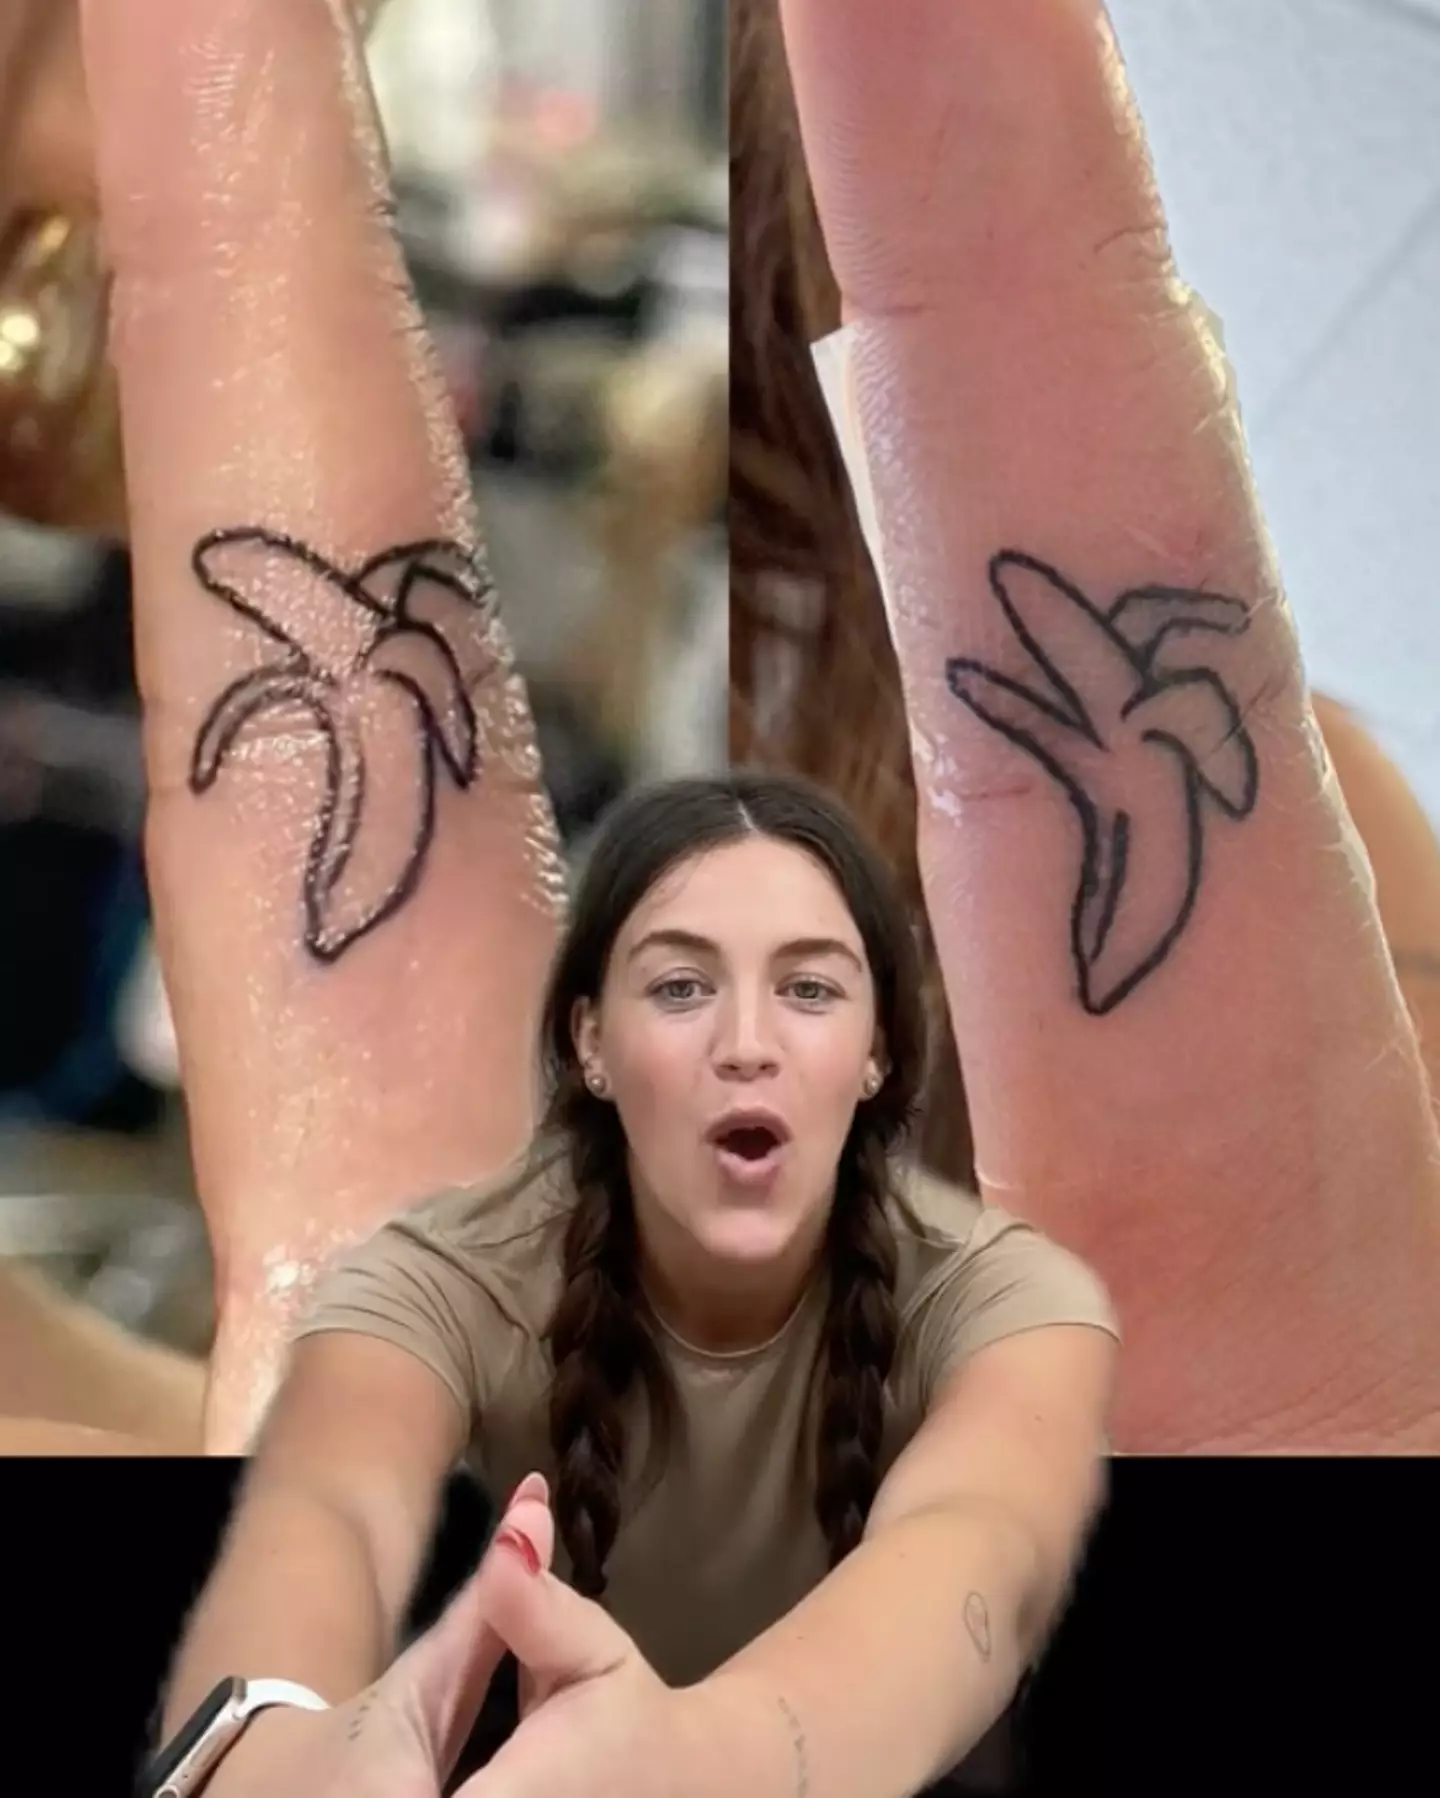 Armstrong's initial tattoo, and what the artist did after she wanted a touch up after it faded.